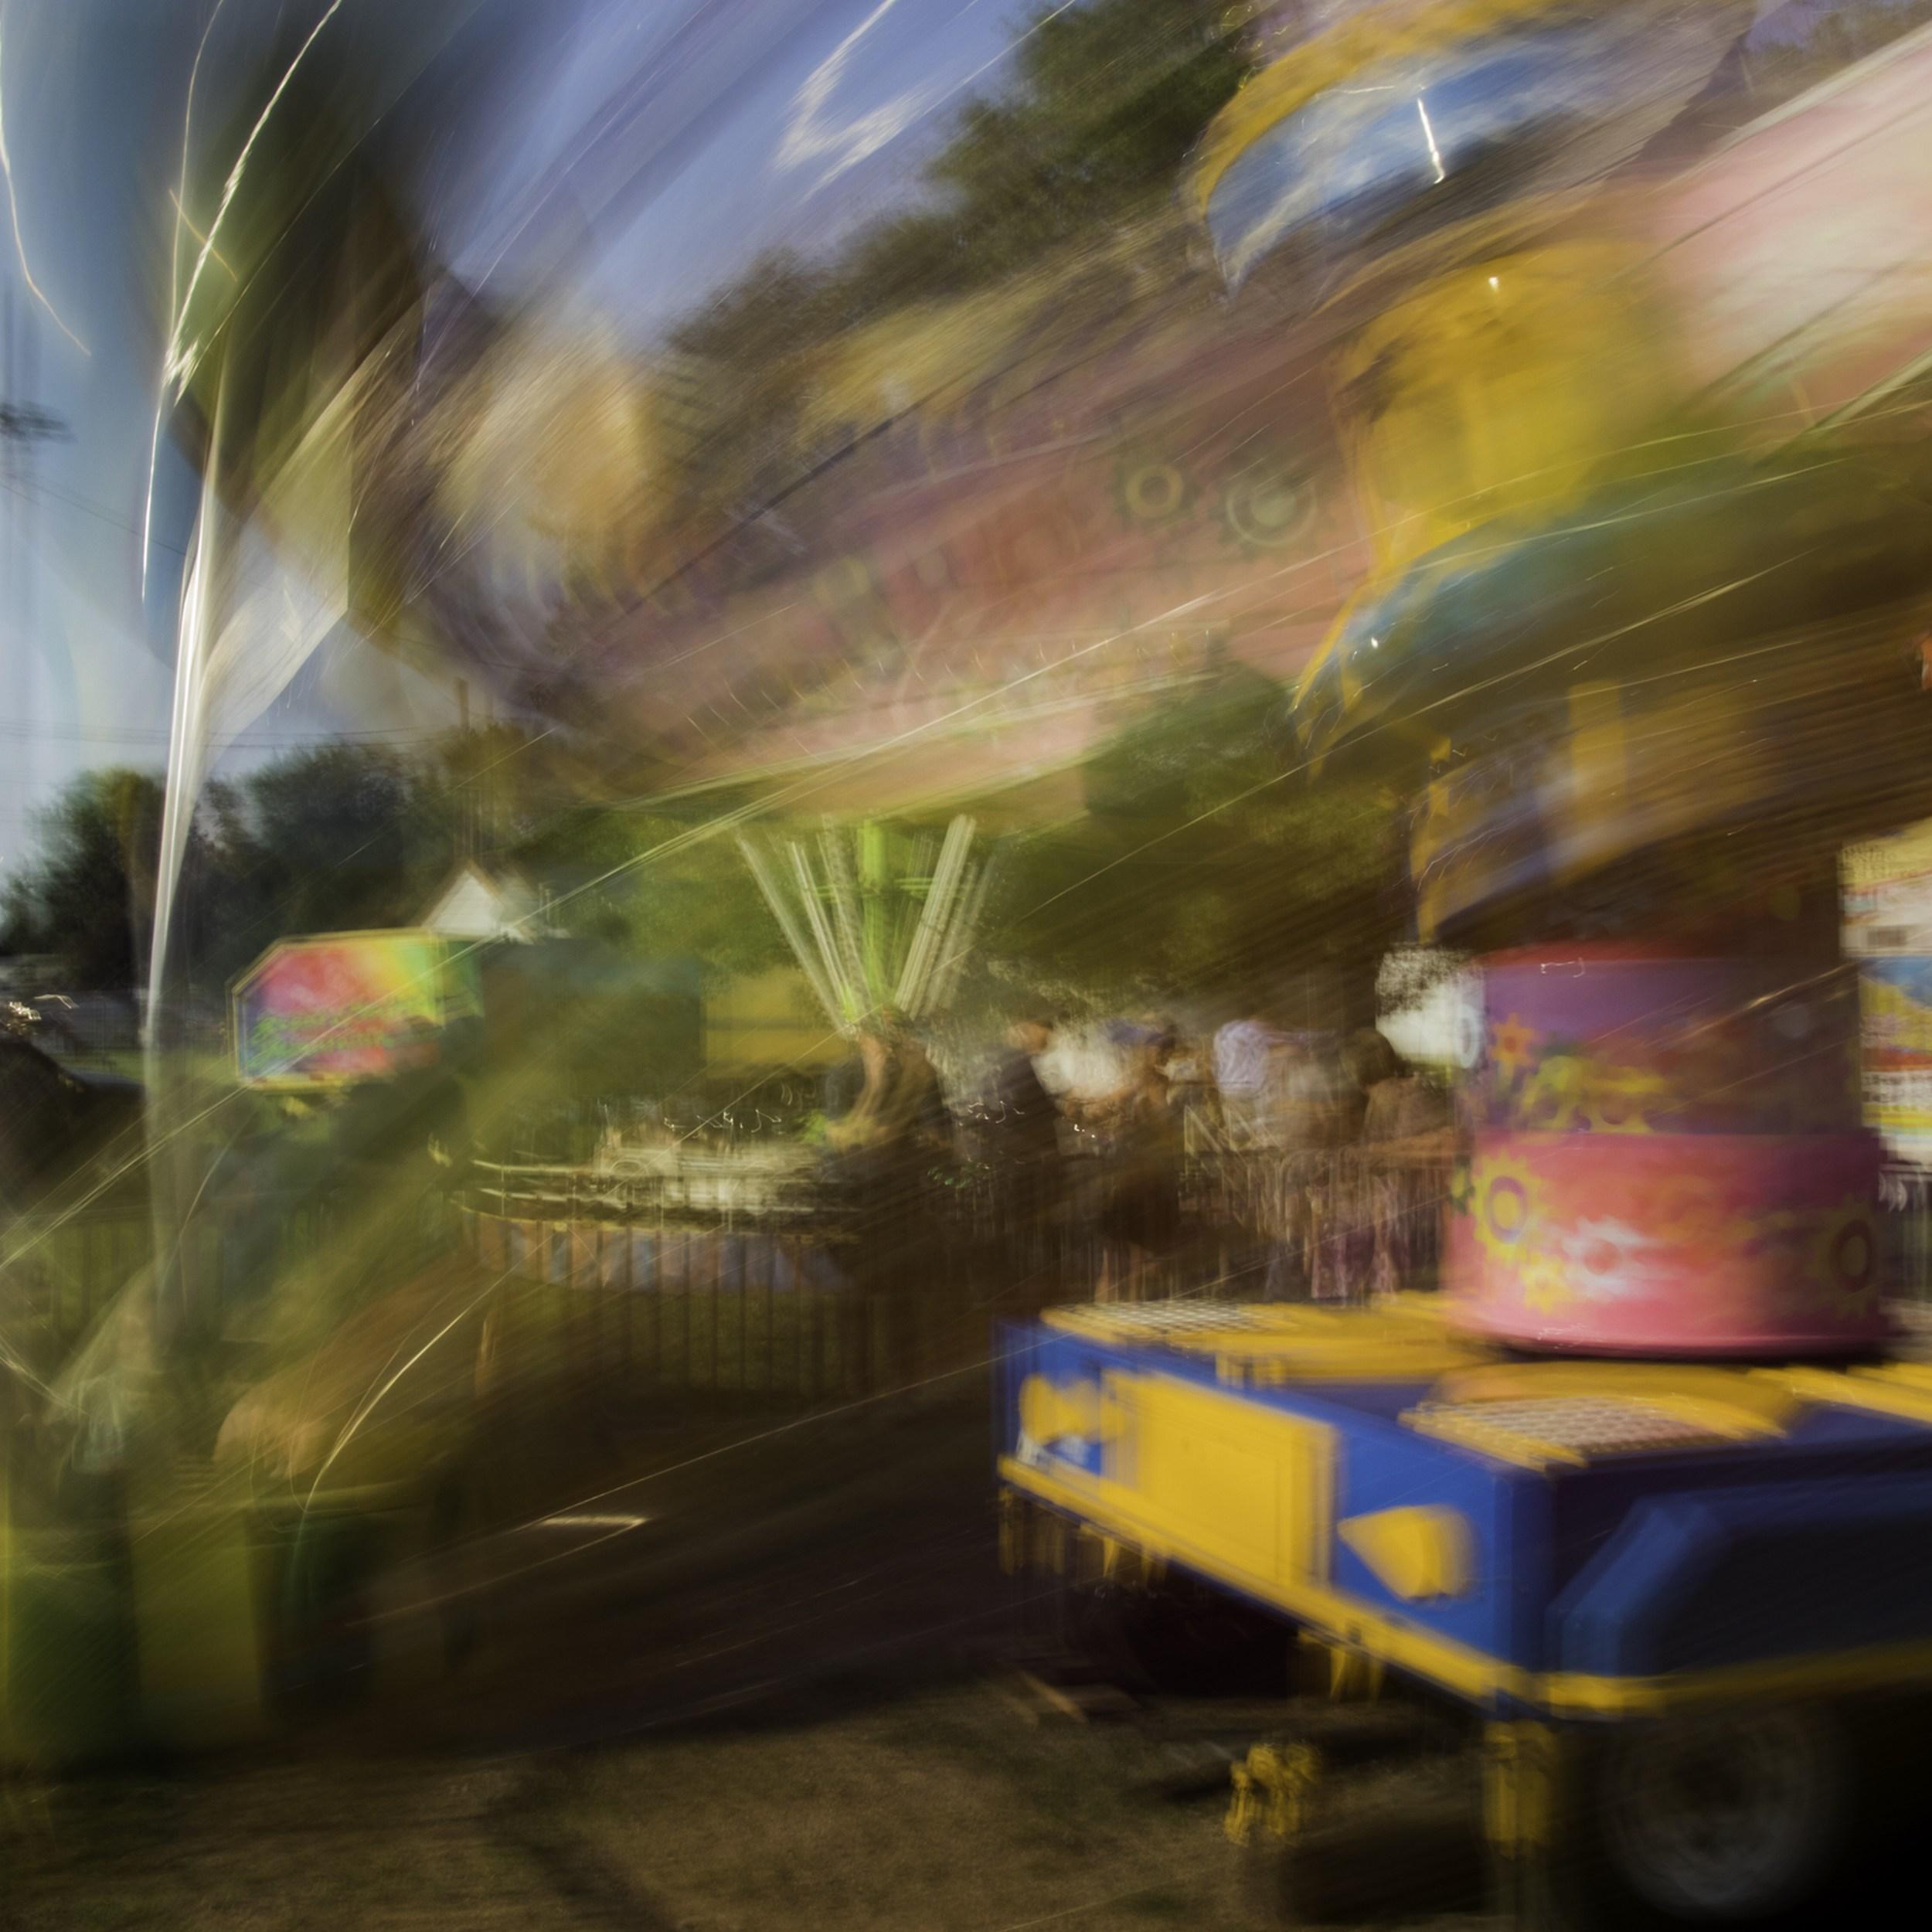 Twirl (carnival ride, motion blur, colorful, Midwest US, vibrant)